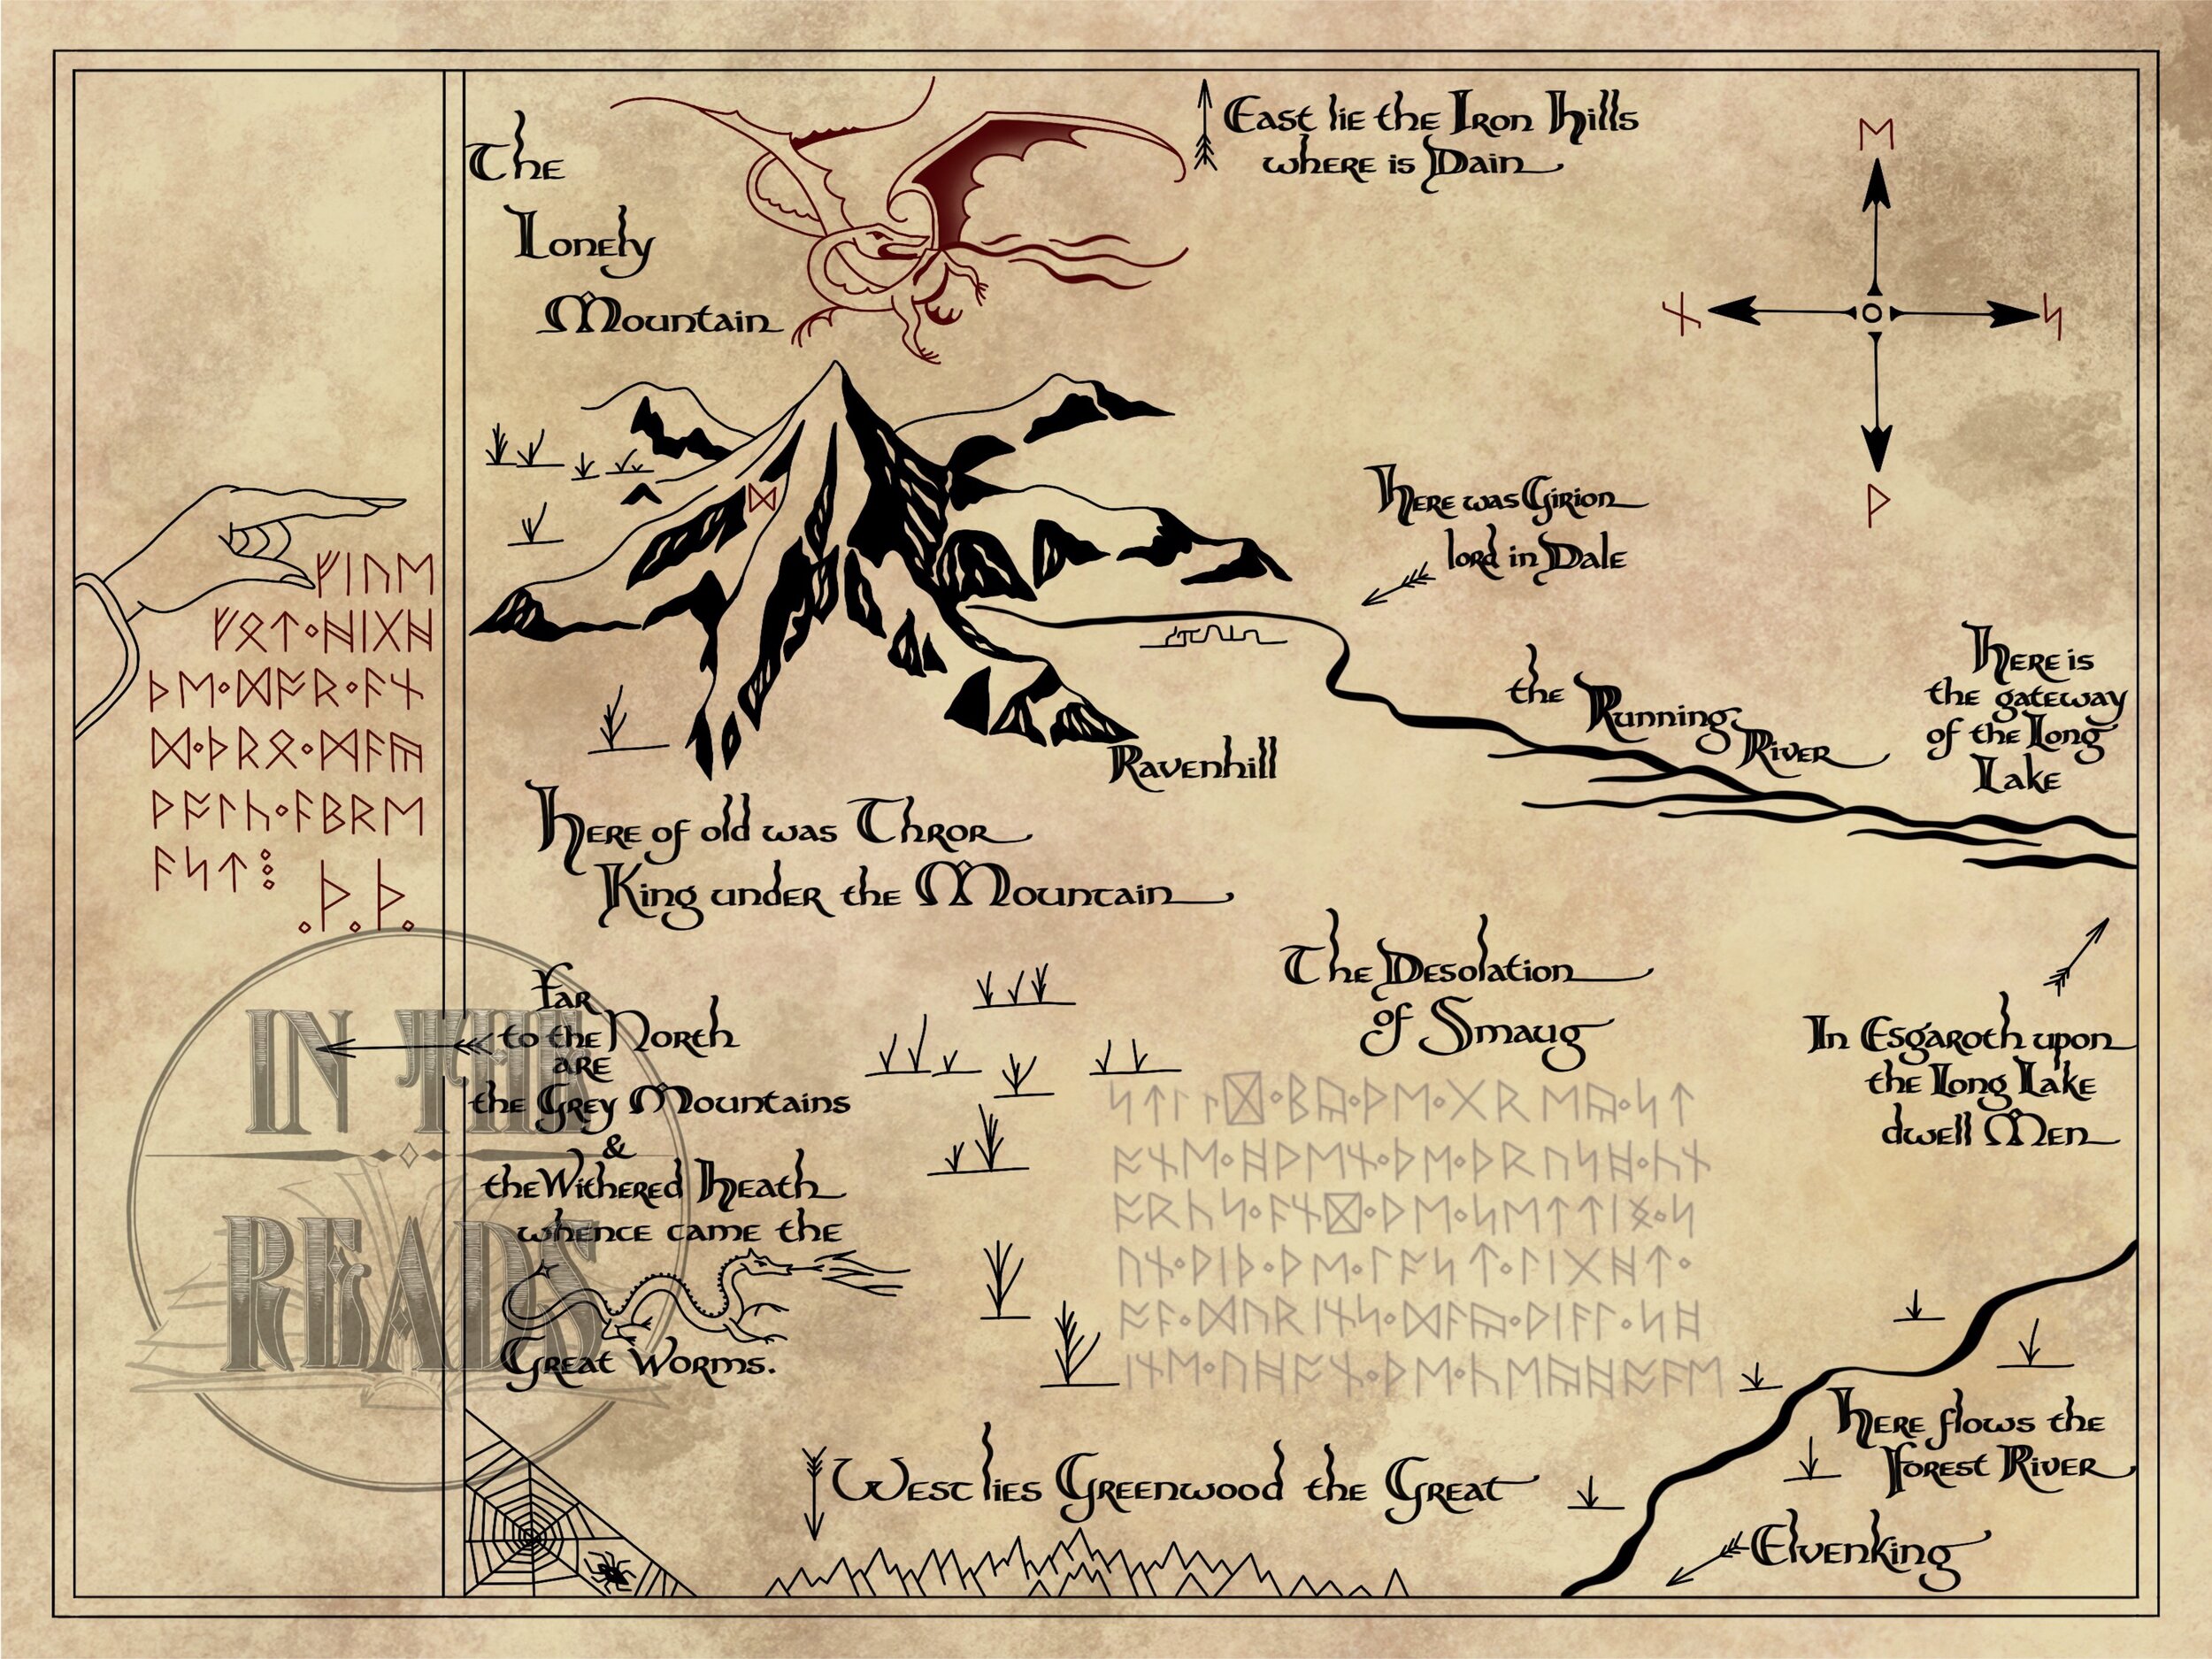 The Lonely Mountain Map.